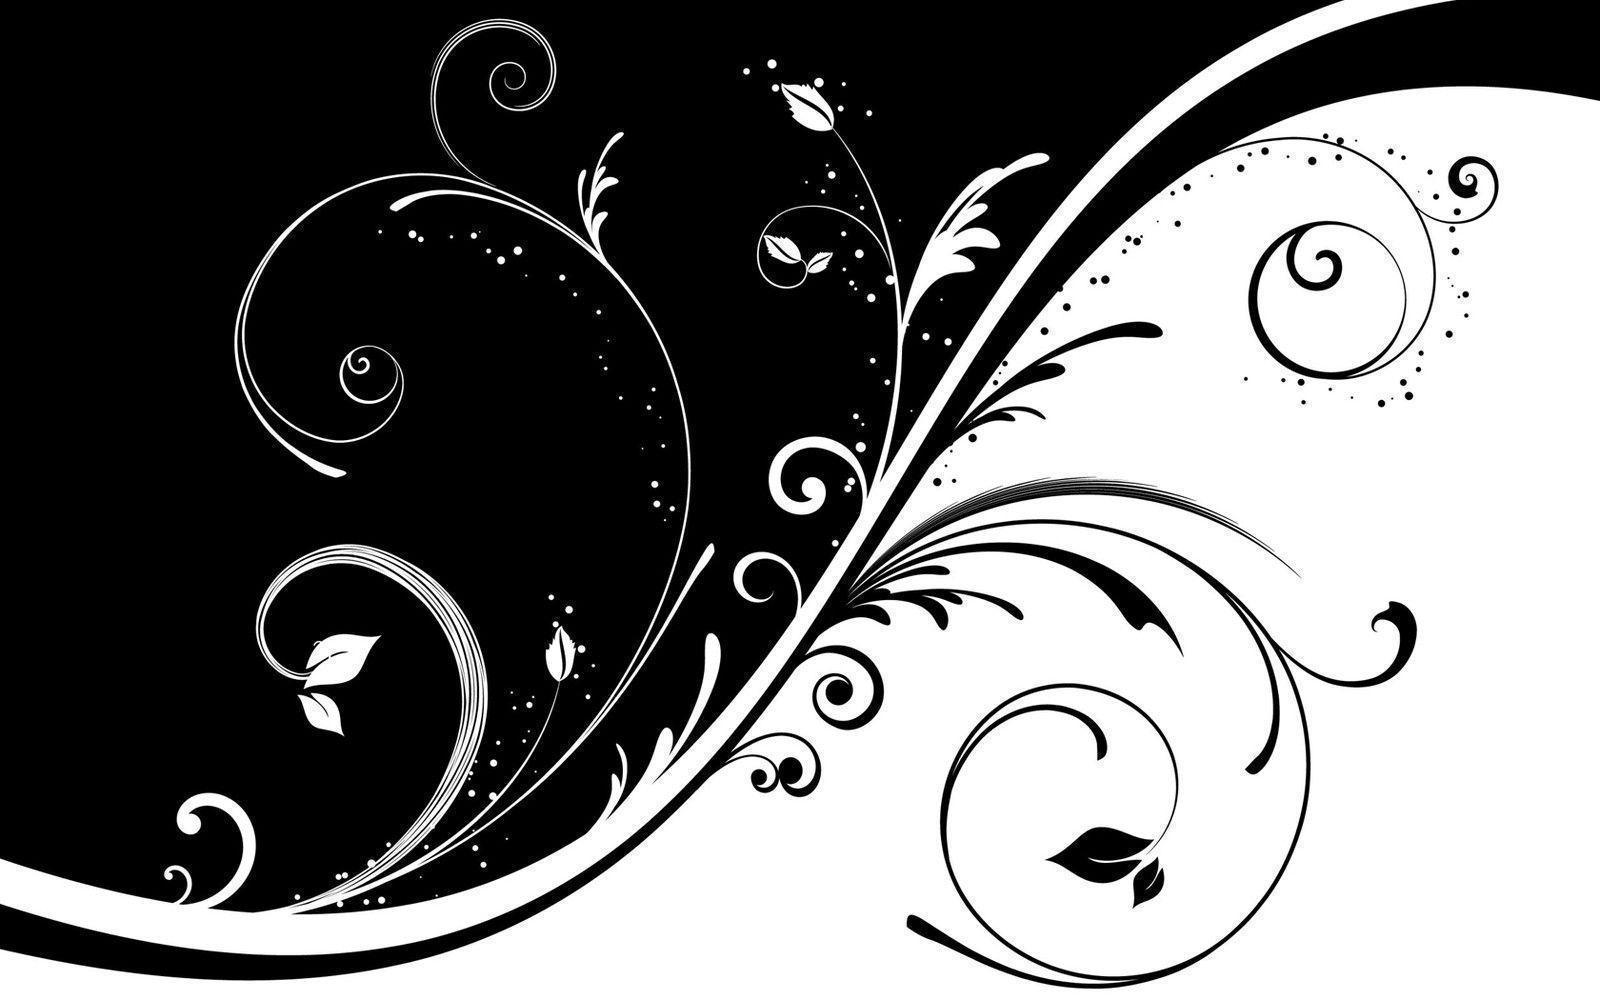 Abstract Black & White Wallpapers